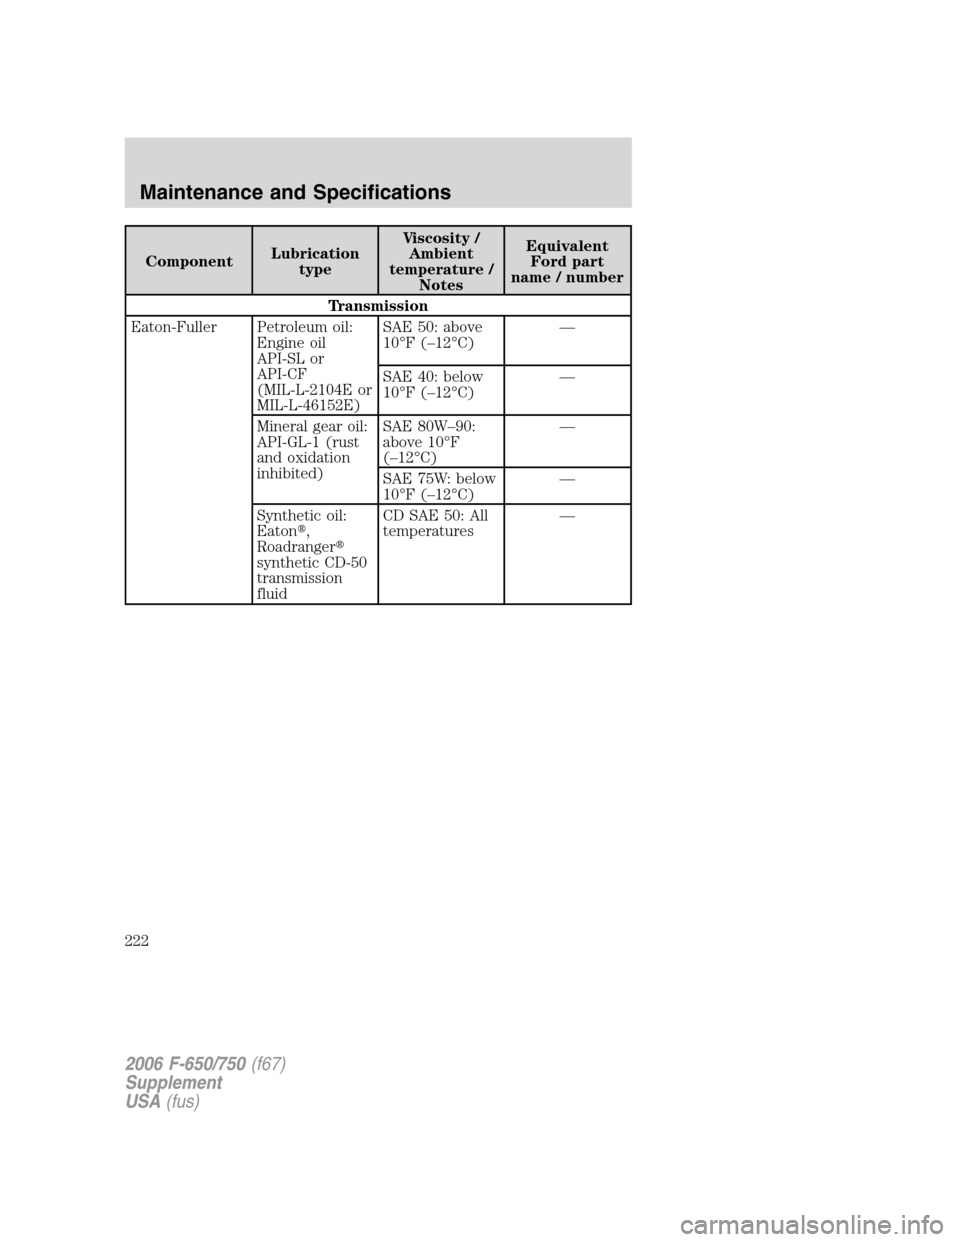 FORD F650 2006 11.G Owners Manual ComponentLubrication
typeViscosity /
Ambient
temperature /
NotesEquivalent
Ford part
name / number
Transmission
Eaton-Fuller Petroleum oil:
Engine oil
API-SL or
API-CF
(MIL-L-2104E or
MIL-L-46152E)SAE